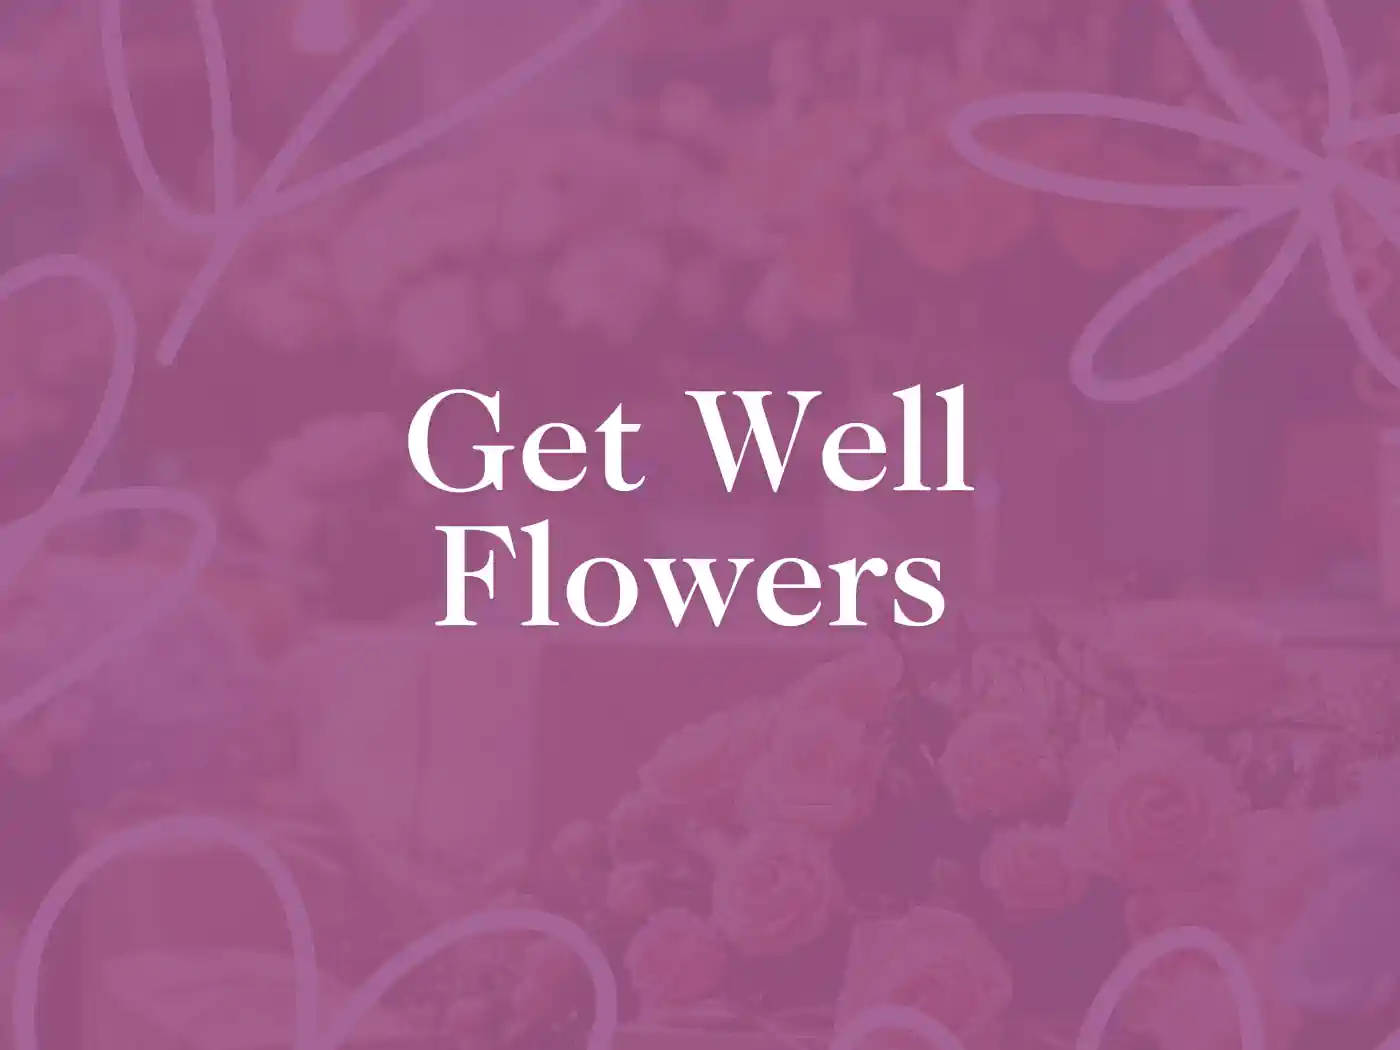 Soft focus promotional image with the text 'Get Well Flowers' over a blurred background of pink roses, conveying a message of care and recovery. Delivered with Heart. Fabulous Flowers and Gifts.